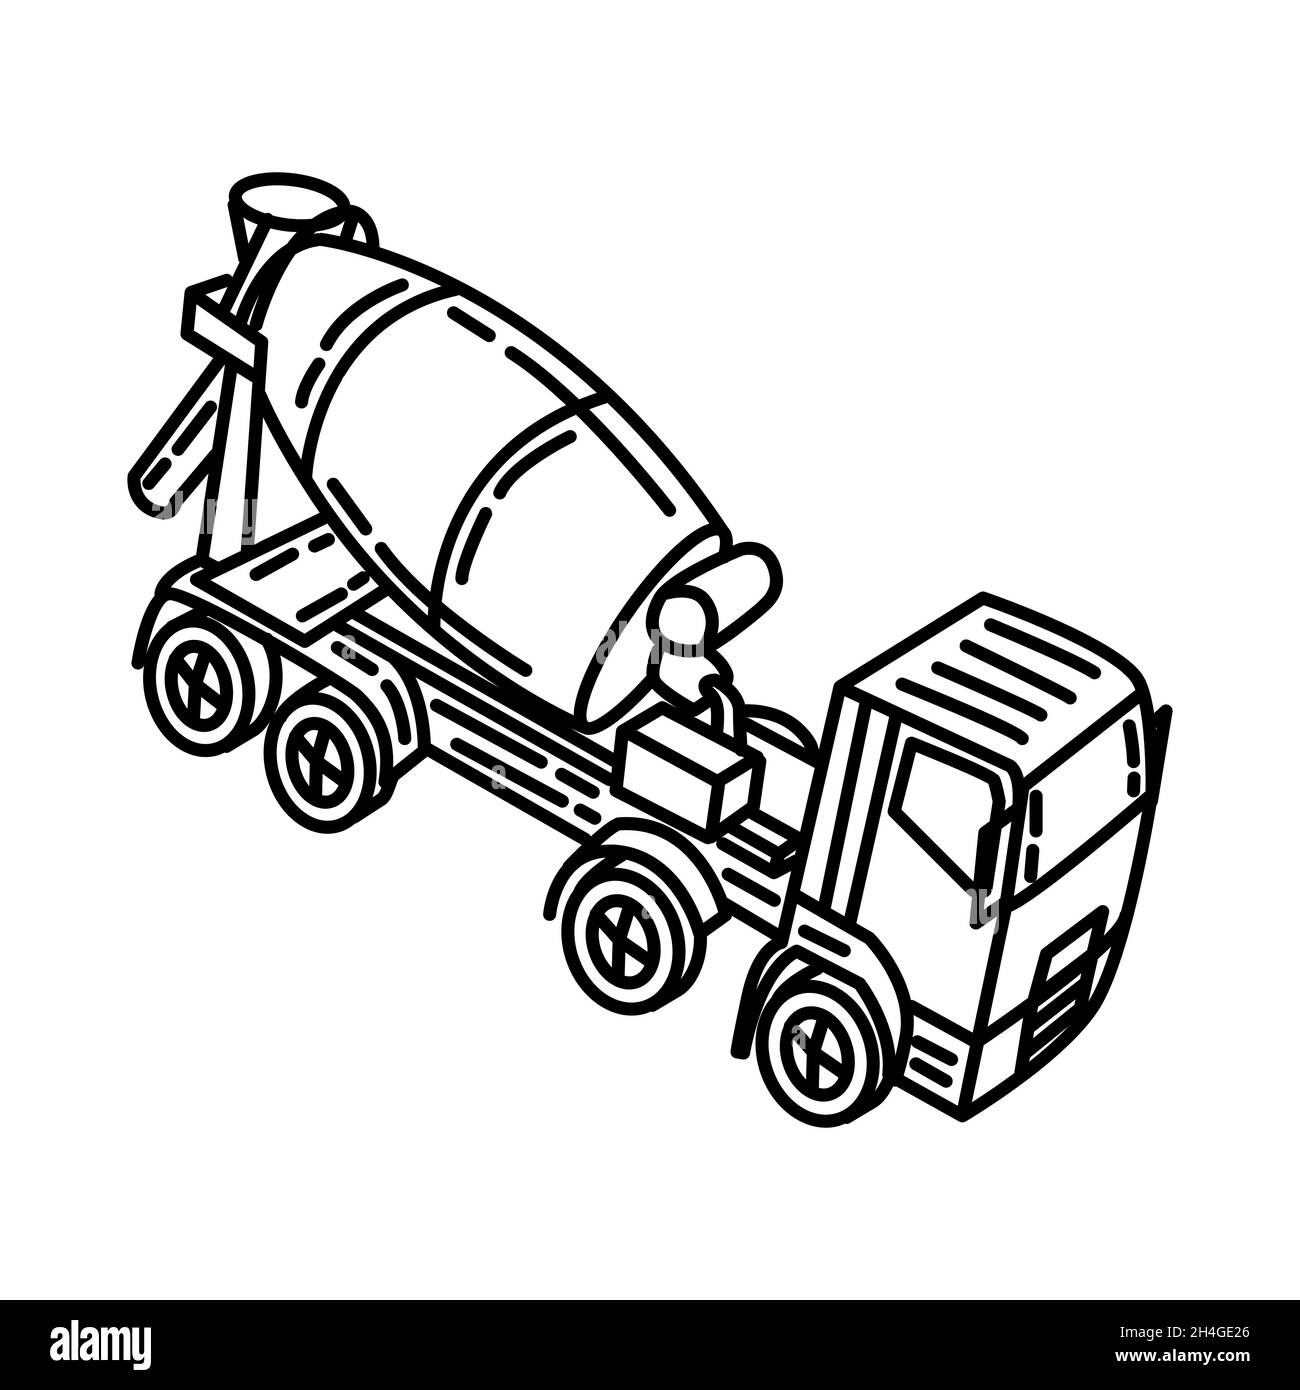 Concrete Mixer Truck Part of Contractor Material and Equipment Device Hand Drawn Icon Set Vector. Stock Vector